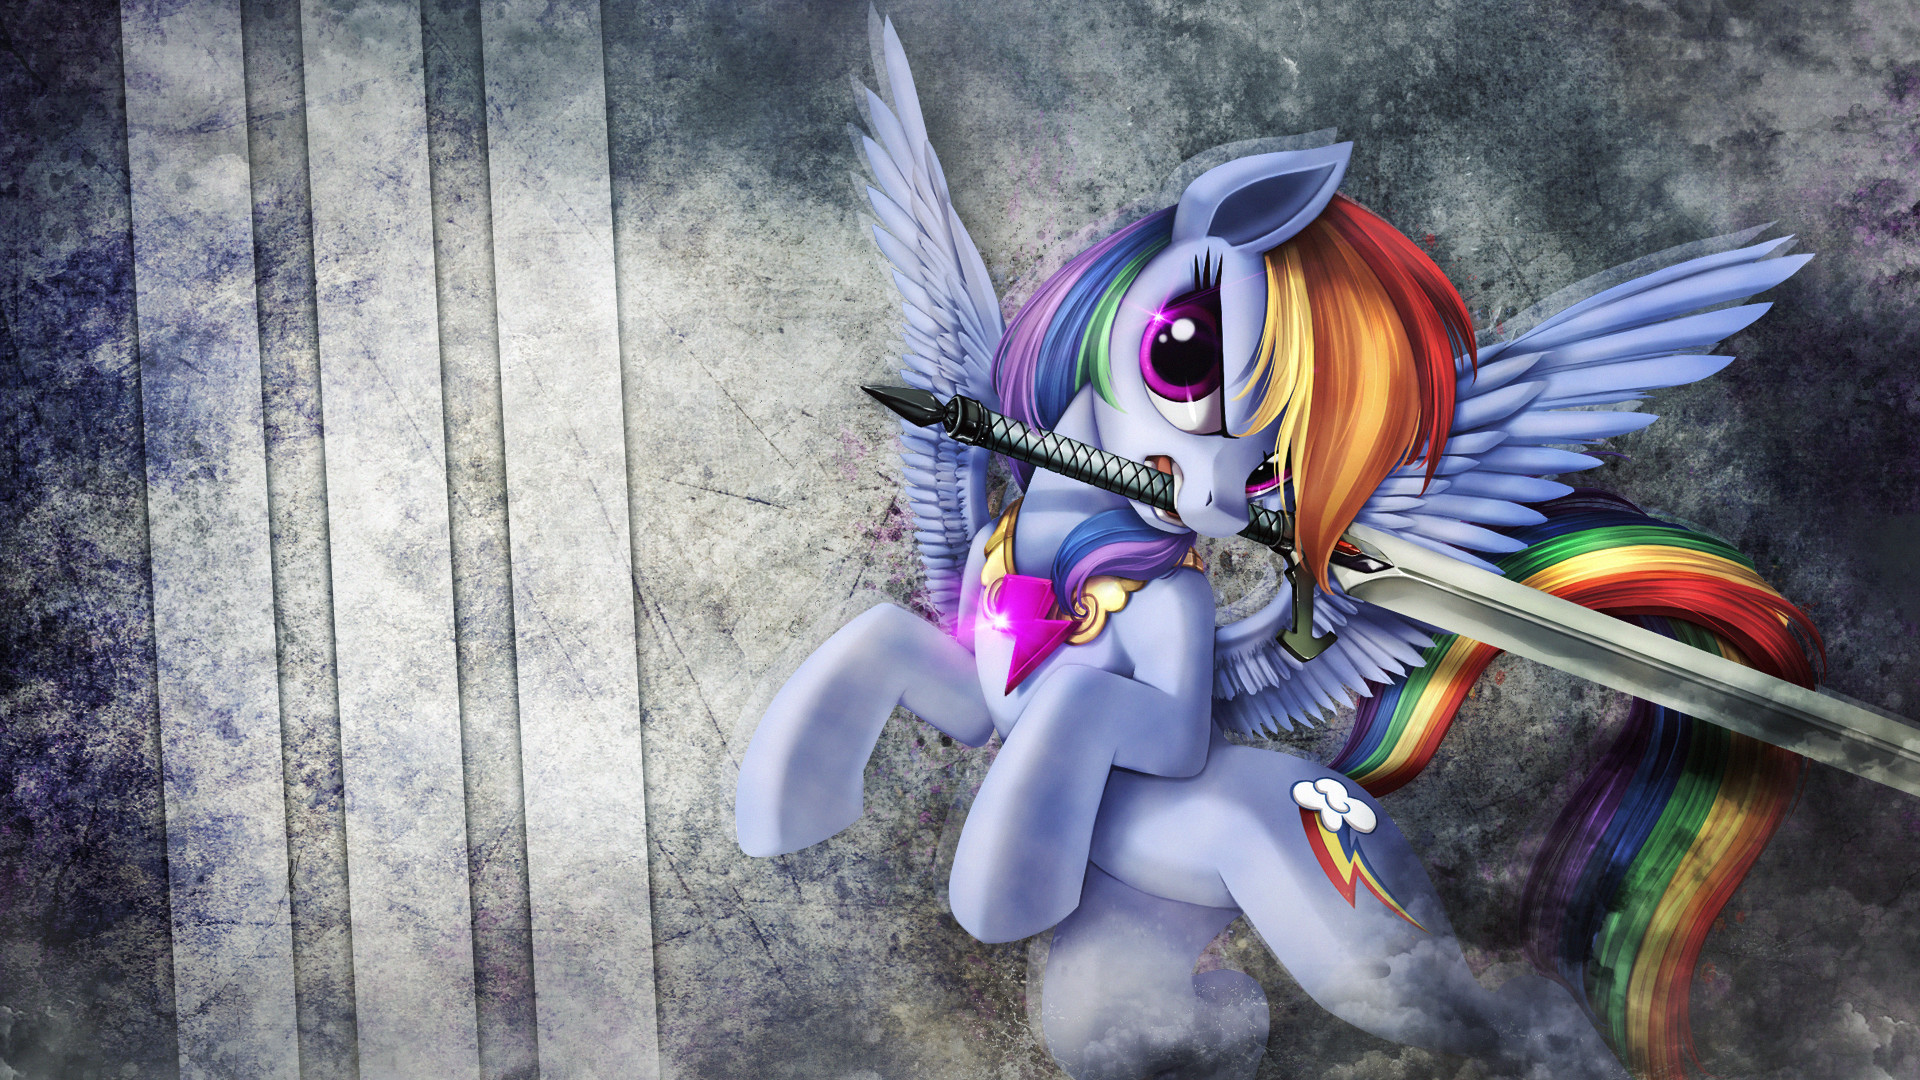 1920x1080 epic mlp mane 6 wallpaper - photo #4. Baby Doll Accessories amp Baby Doll  Stuff Online